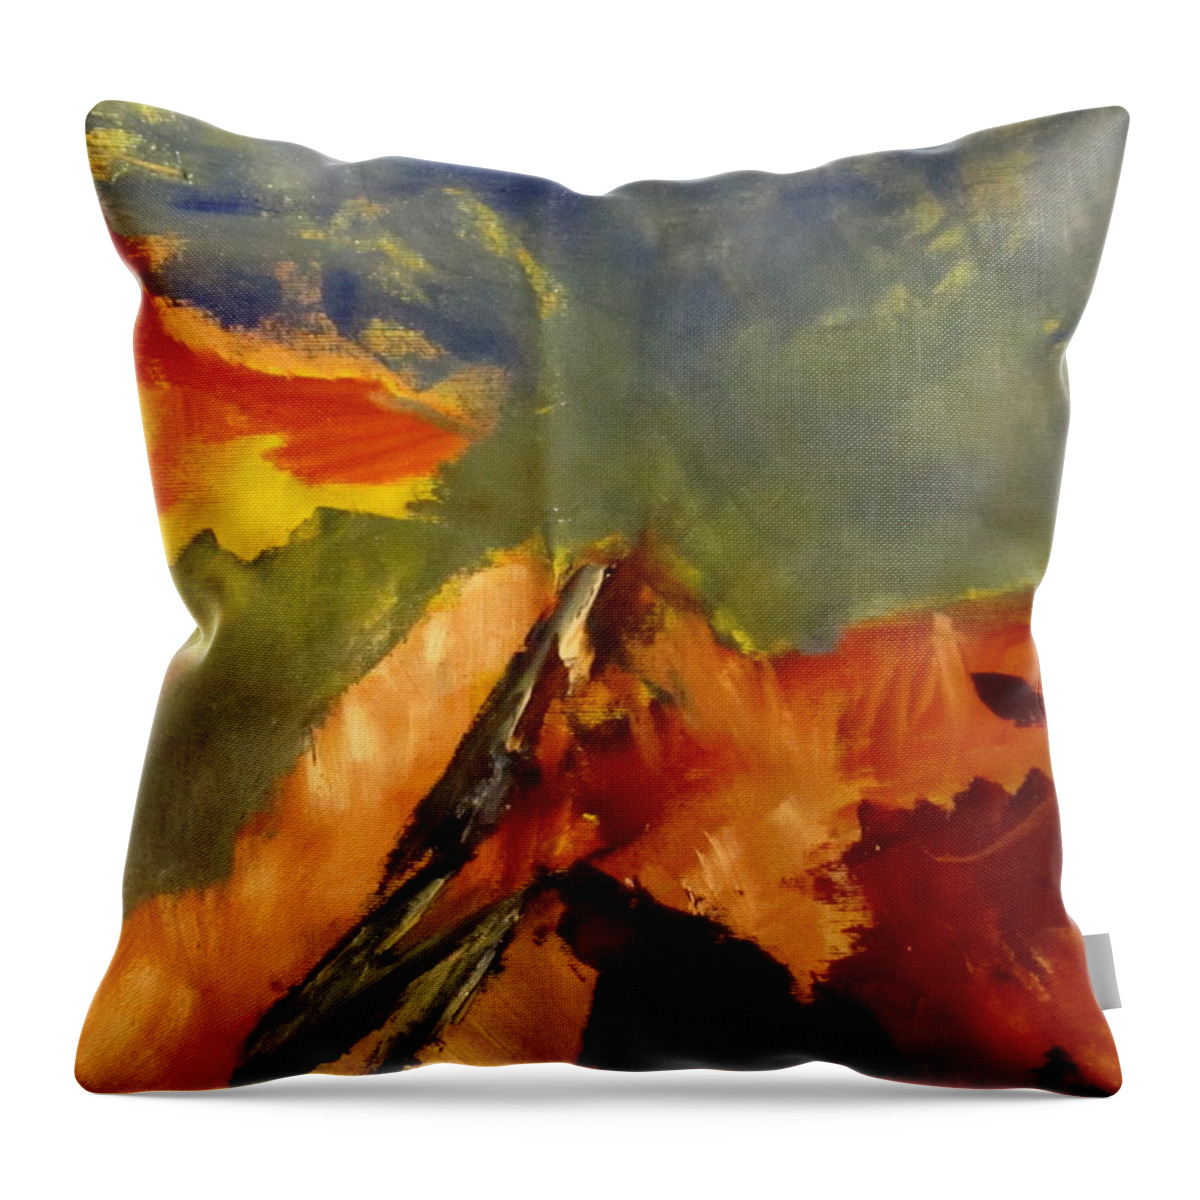  Throw Pillow featuring the painting Across the divide by Patricia Cleasby